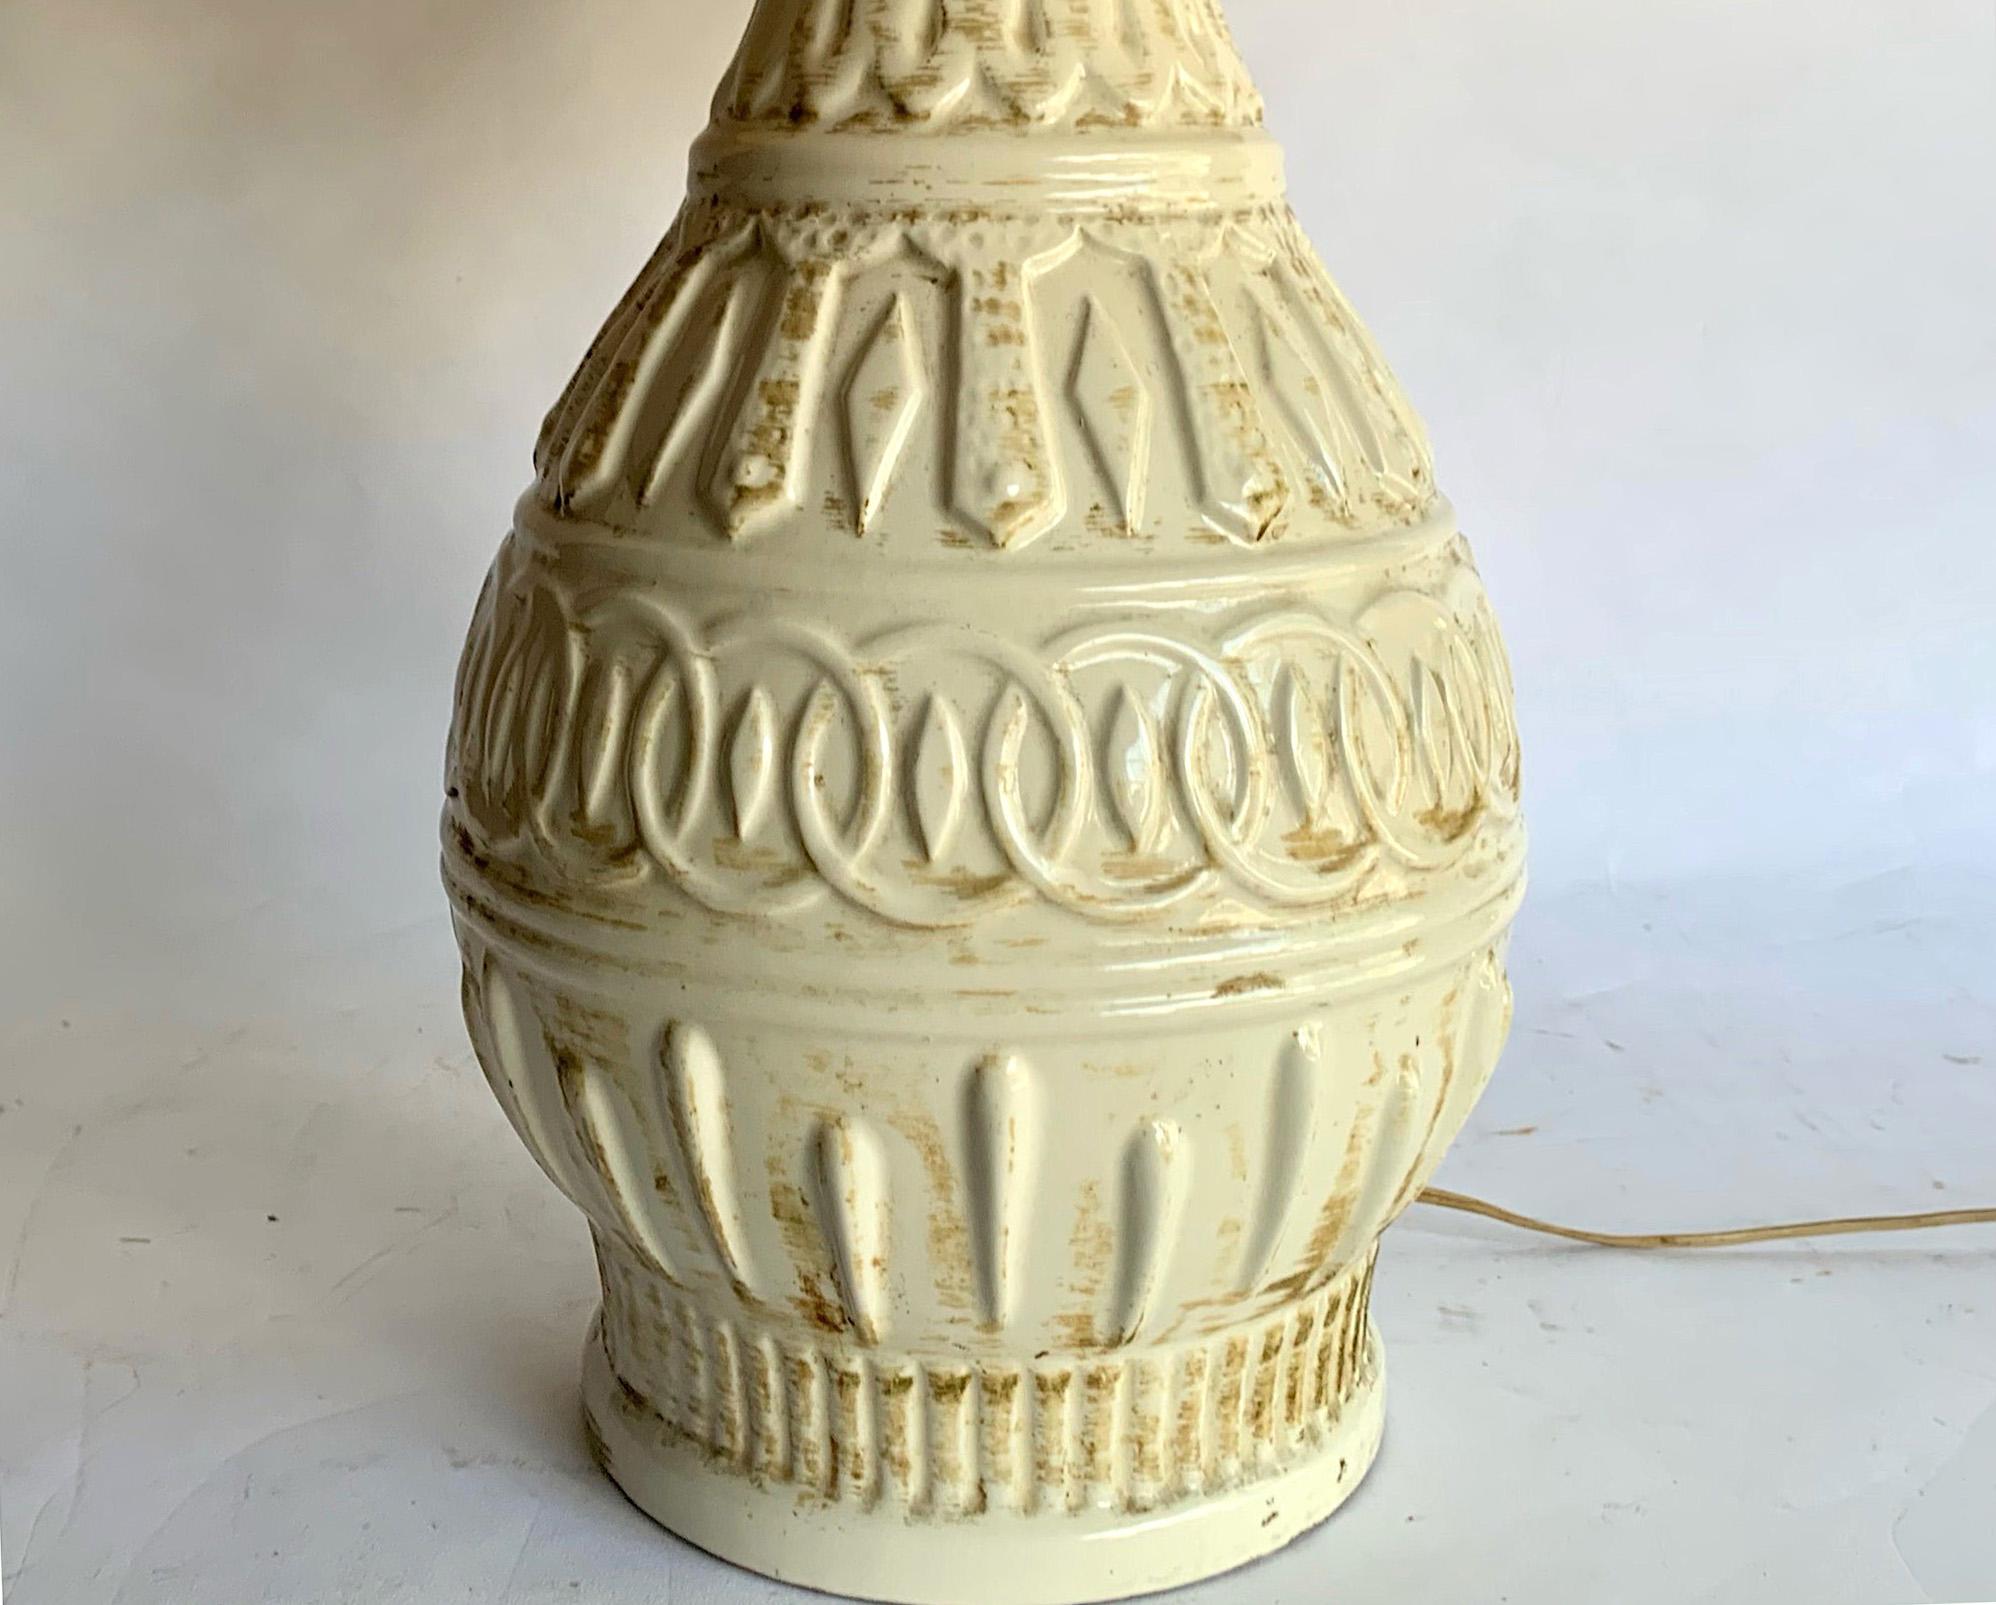 Bohemian Cream Ceramic Midcentury Table Lamp, 1960s, Chainlink Pattern in Relief For Sale